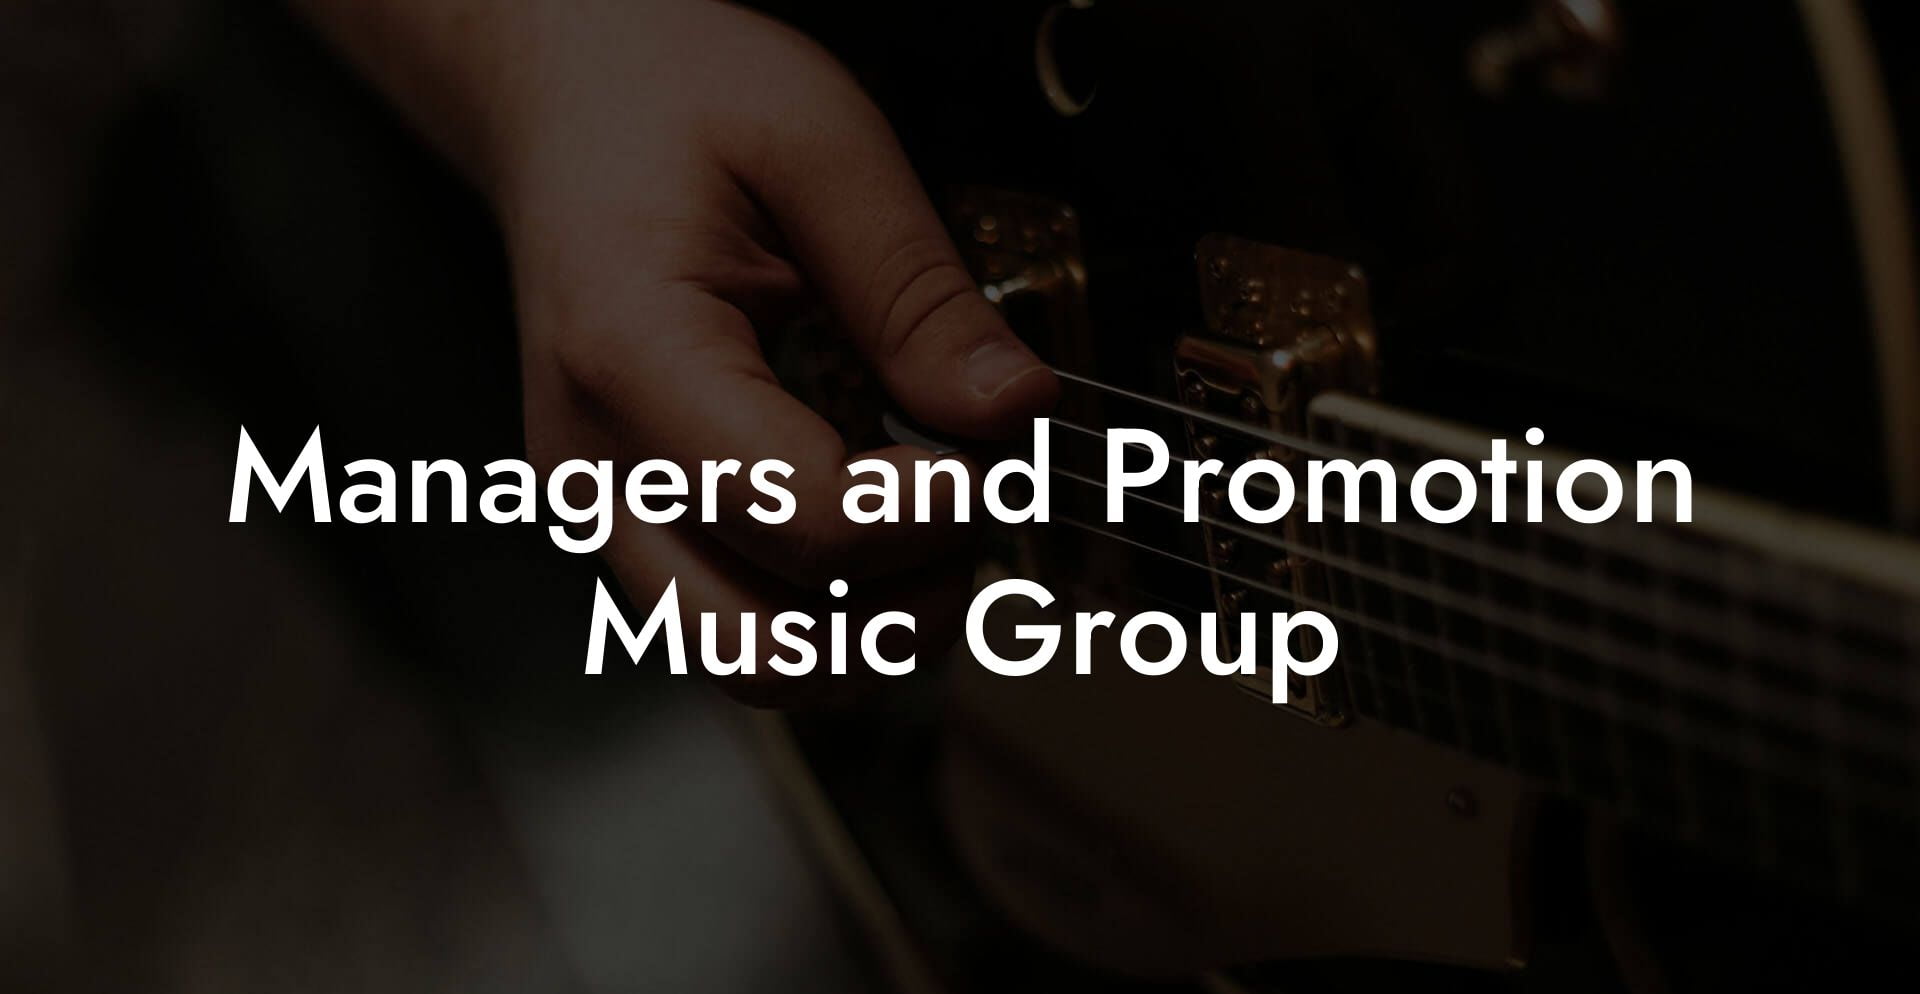 Managers and Promotion Music Group